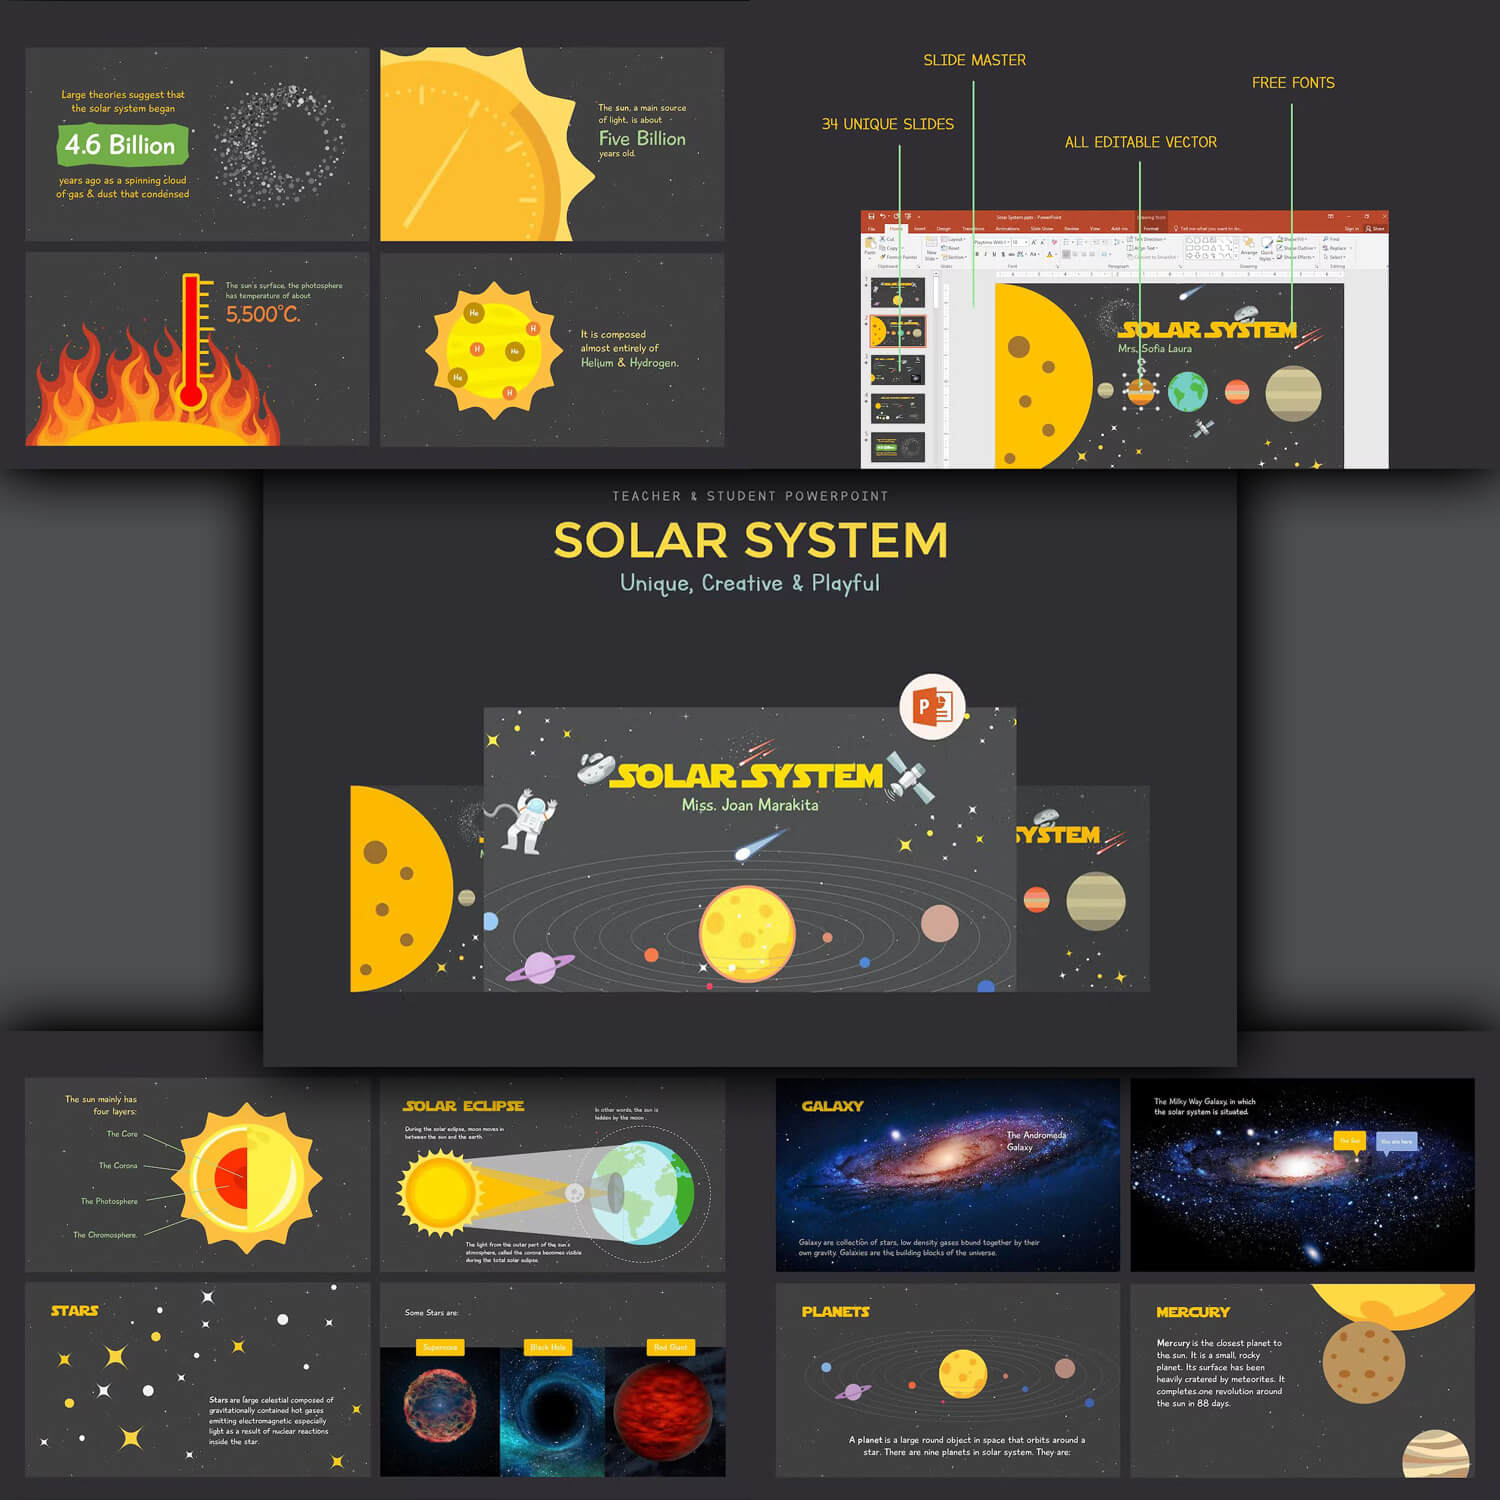 Unique, creative and playful of Solar system.